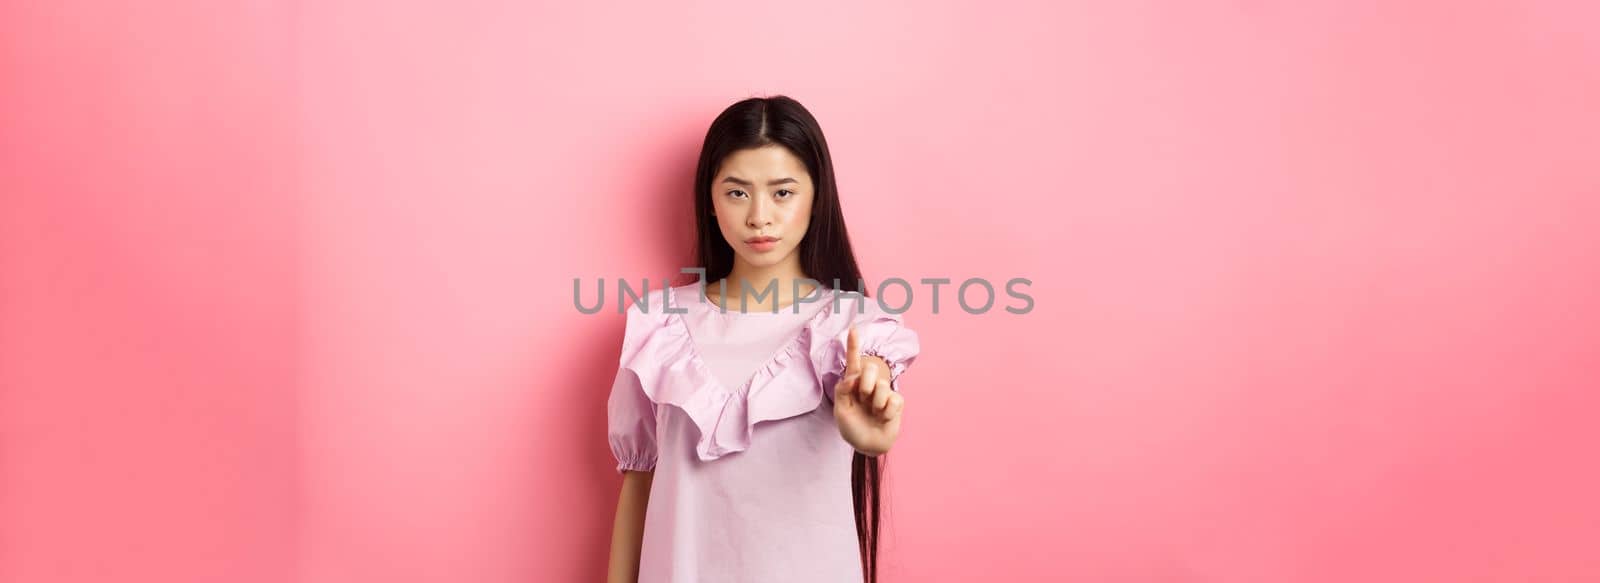 She says no. Serious asian girl shaking finger in stop gesture, prohibit and disagree with person, scolding bad behaviour, standing against pink background.